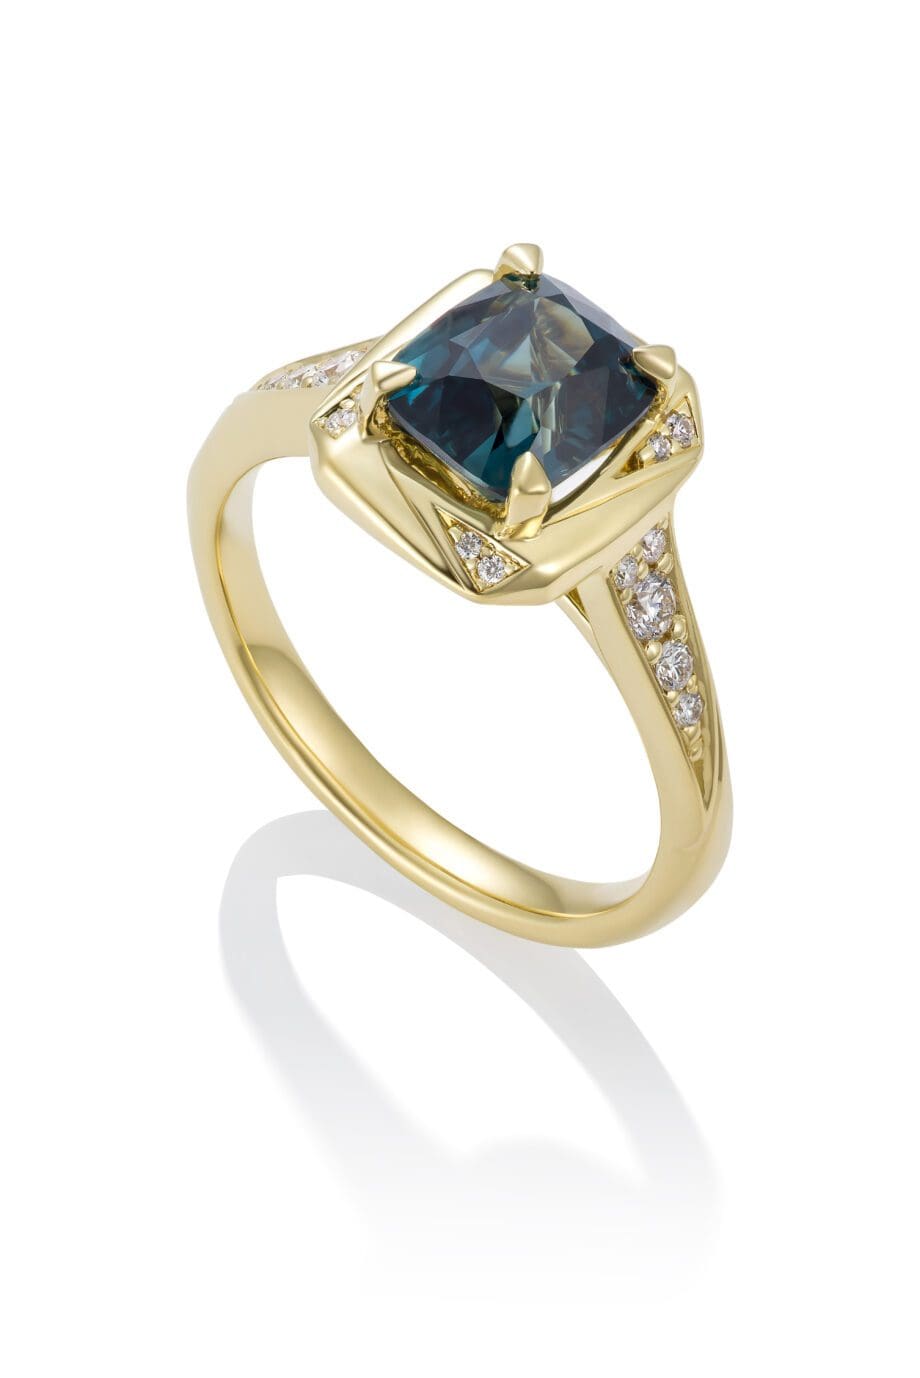 Teal sapphire and gold ring